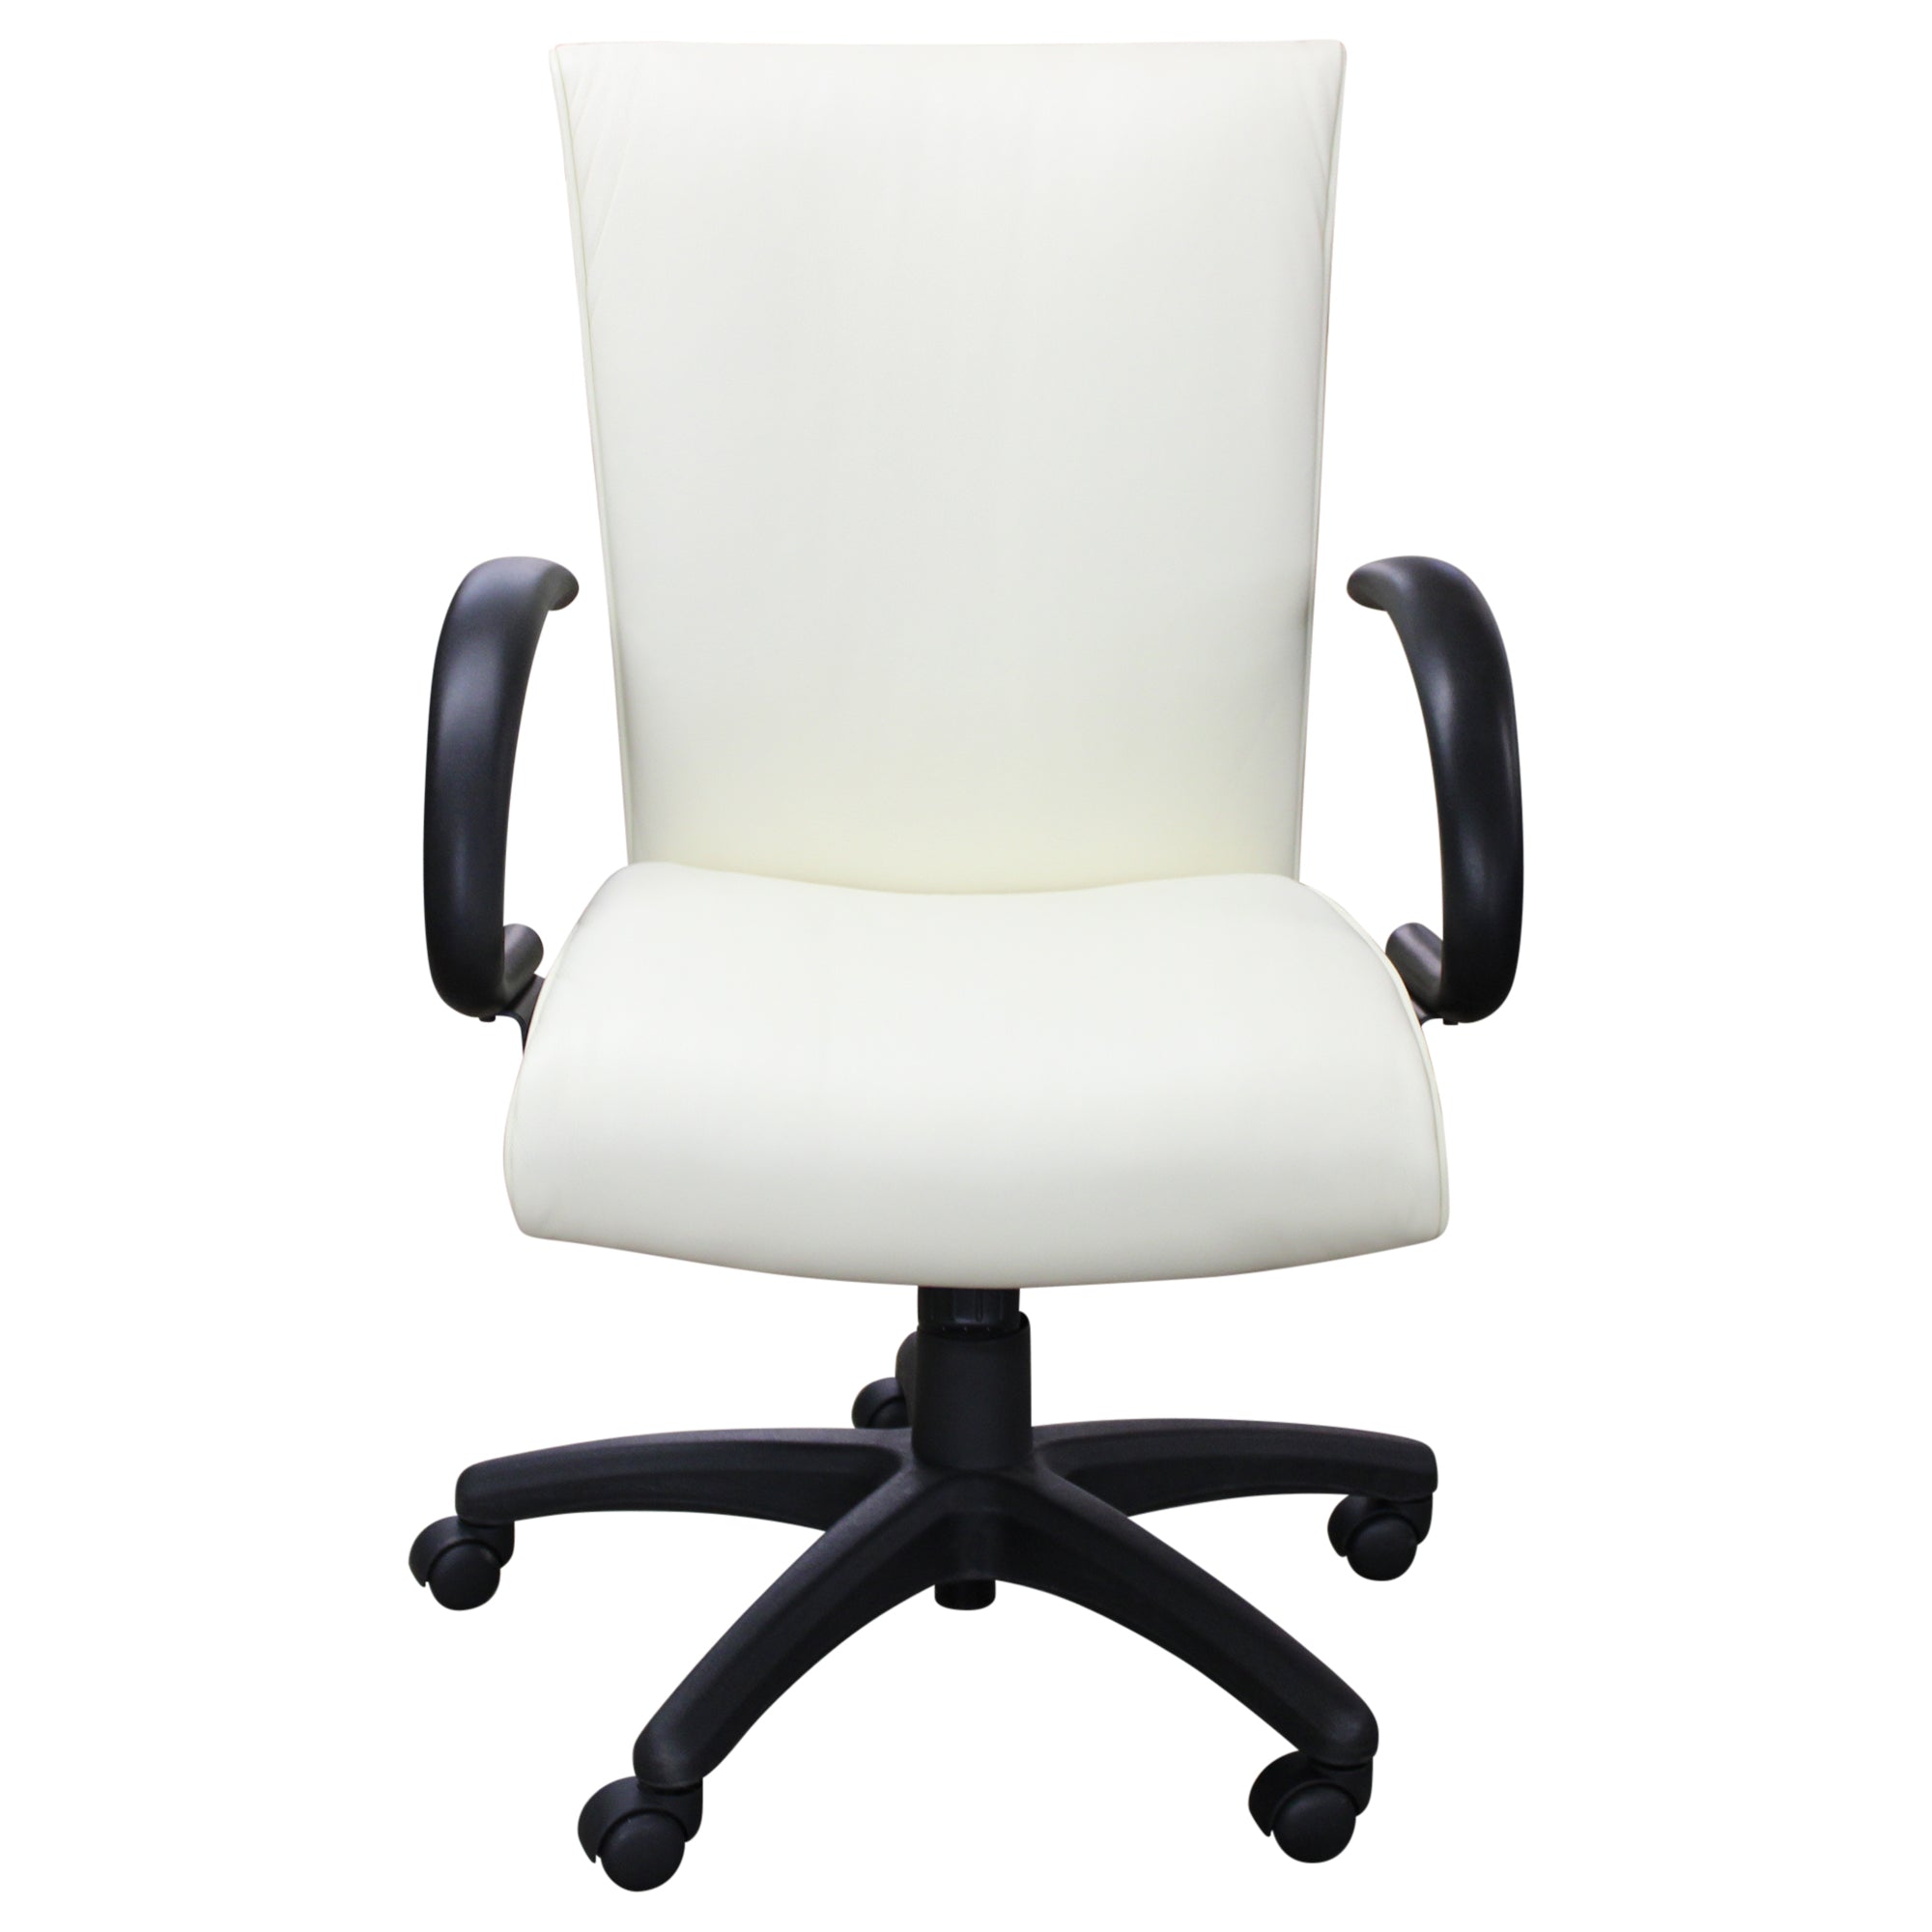 Compel Zen Conference Chair, Pearl - New CLOSEOUT